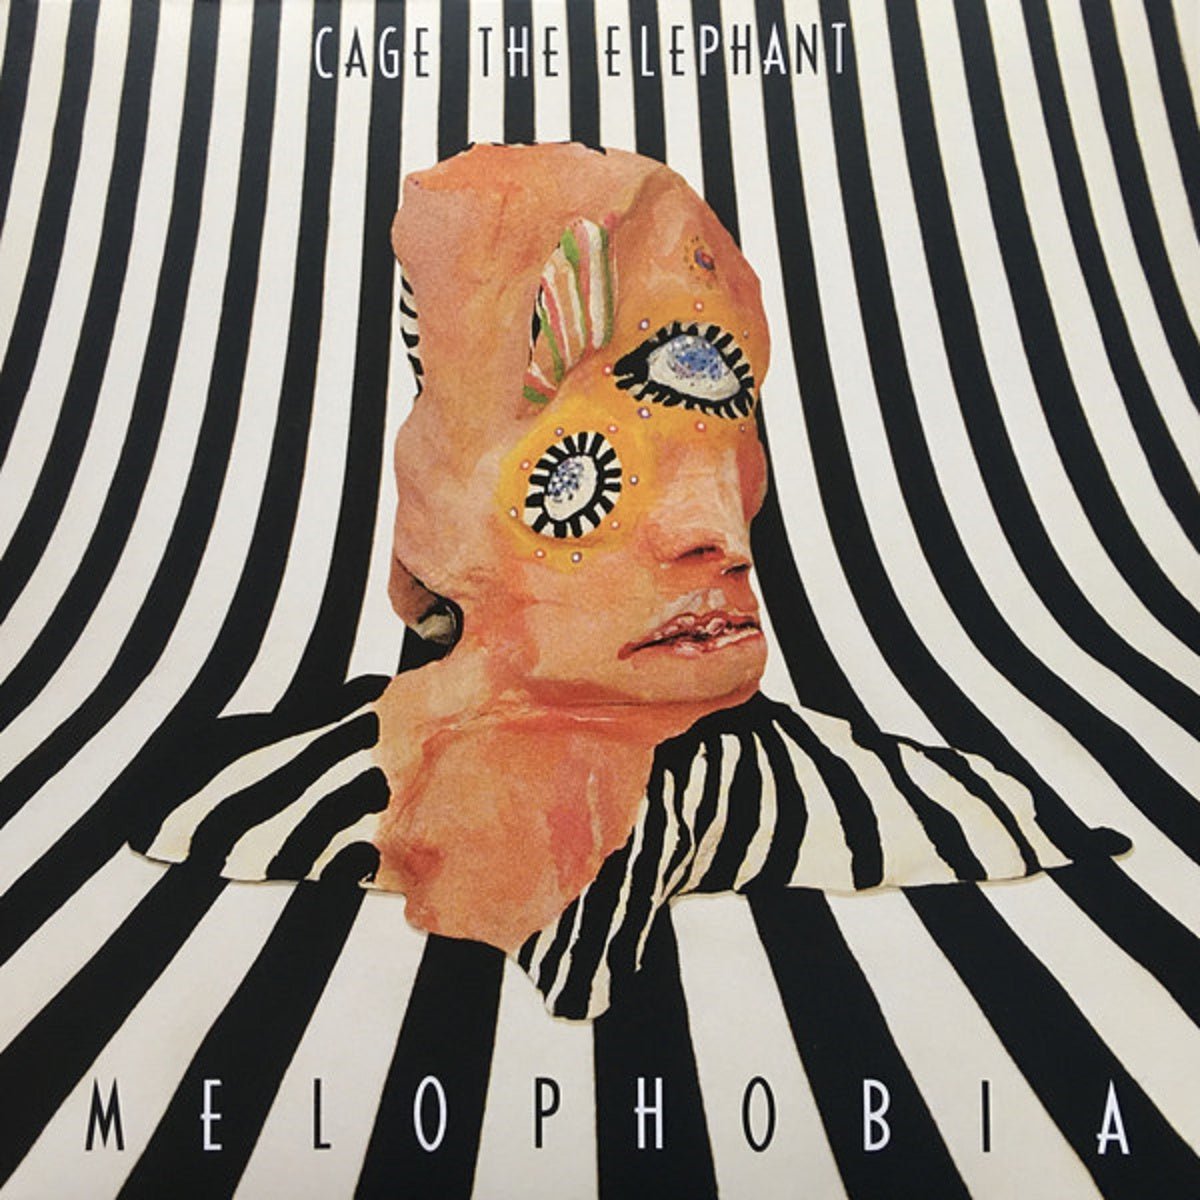 Cage The Elephant - Melophobia - BROKEN 8 RECORDS